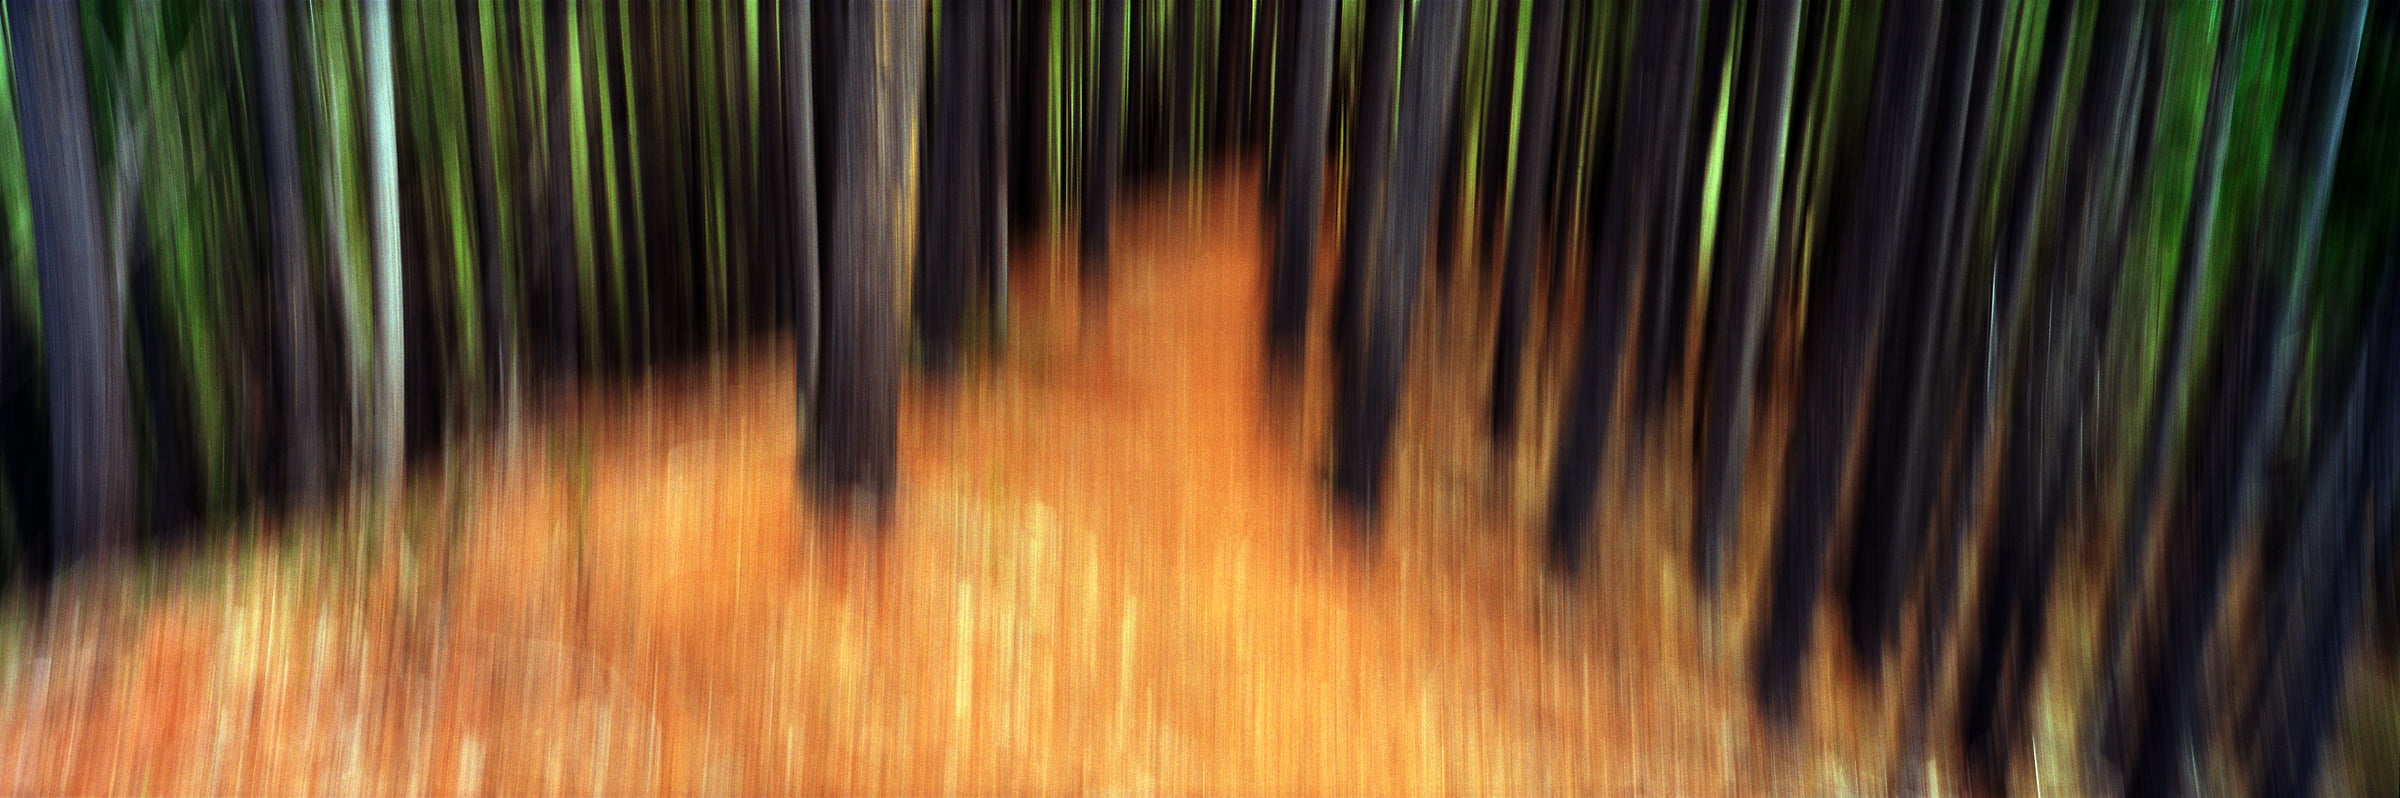 336 megapixels! A very high resolution, large-format VAST photo print of a forest in an abstract style; fine art photograph created by Scott Dimond in Kimberley, British Columbia, Canada.